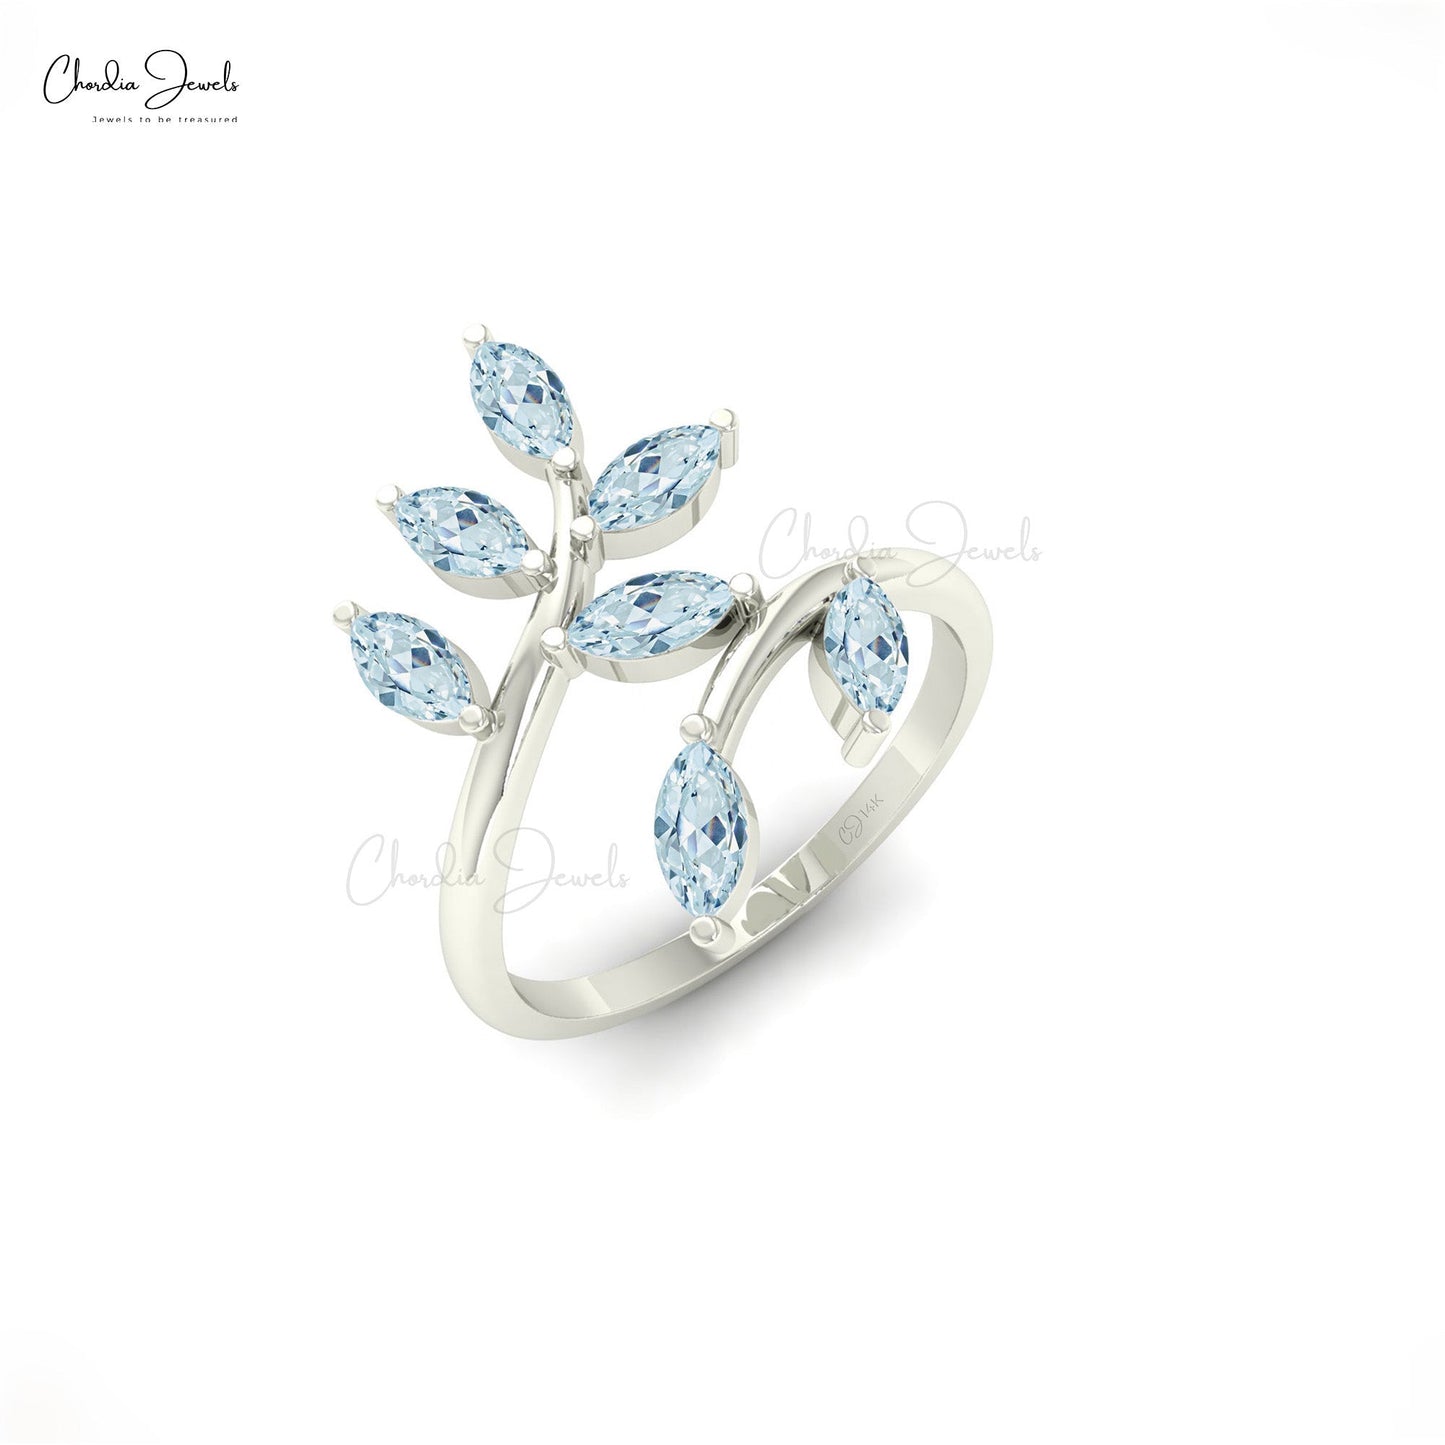 Aquamarine Blue Swarovski Square Crystal Ring Sterling Silver Wrapped  Jewelry